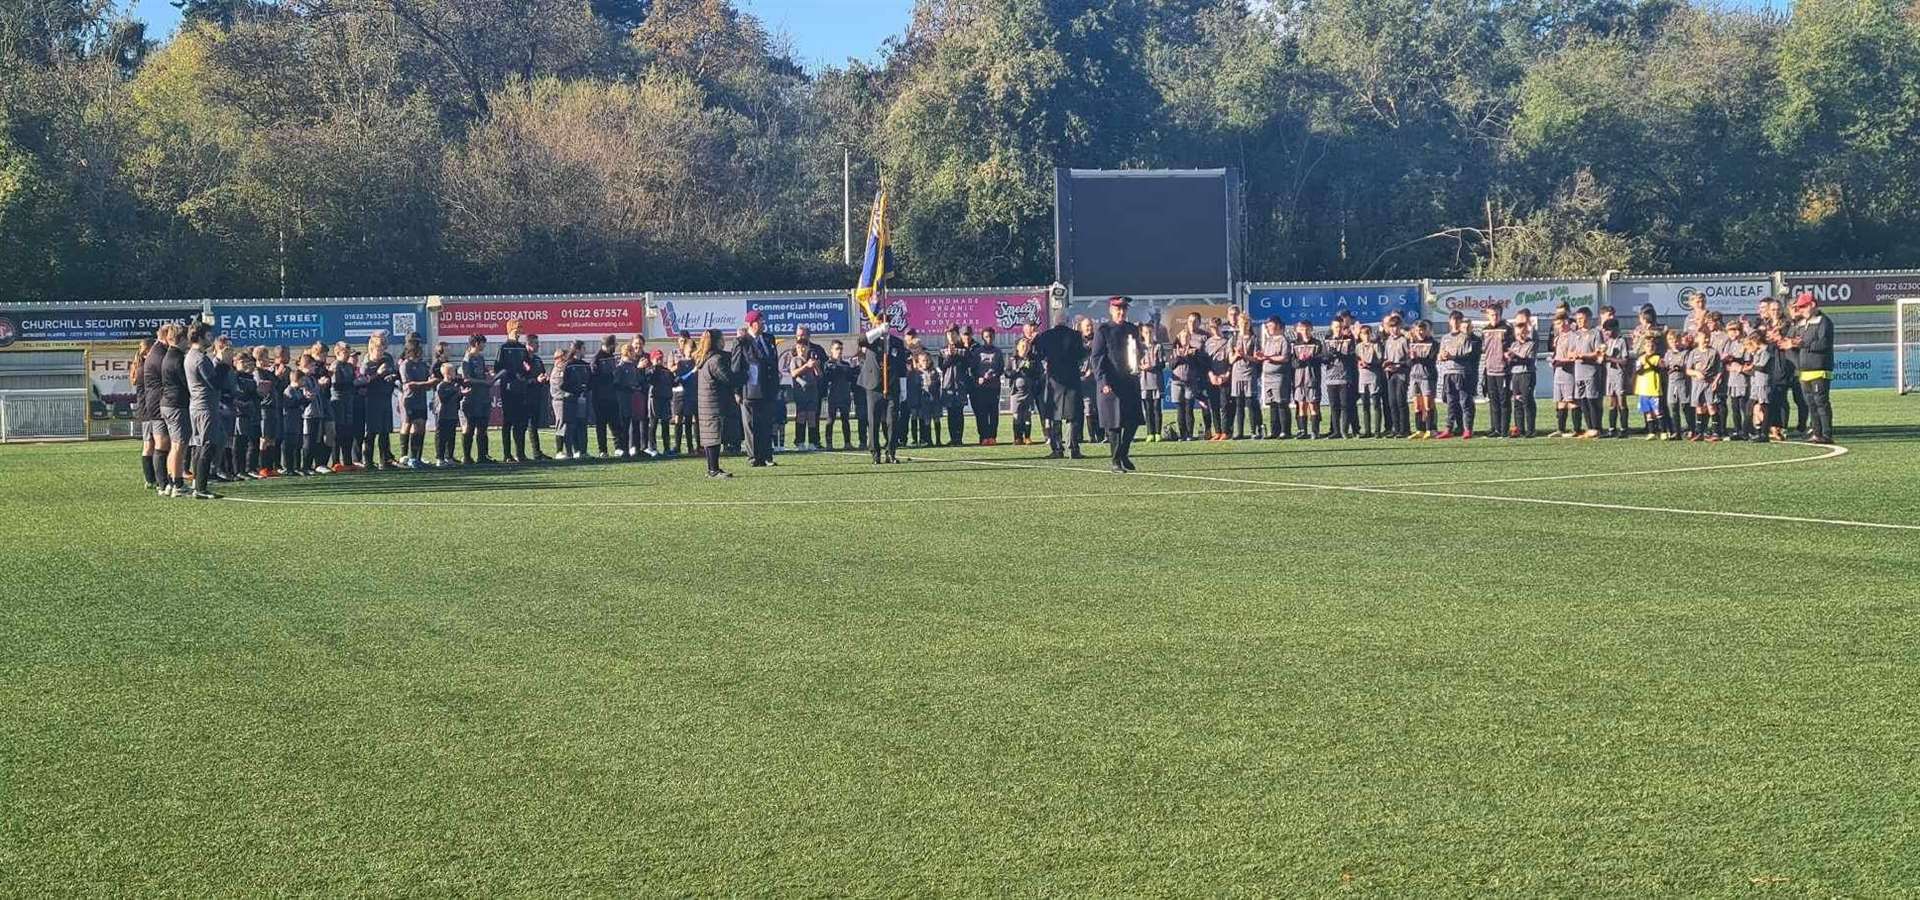 The Raiders held their own Remembrance Service